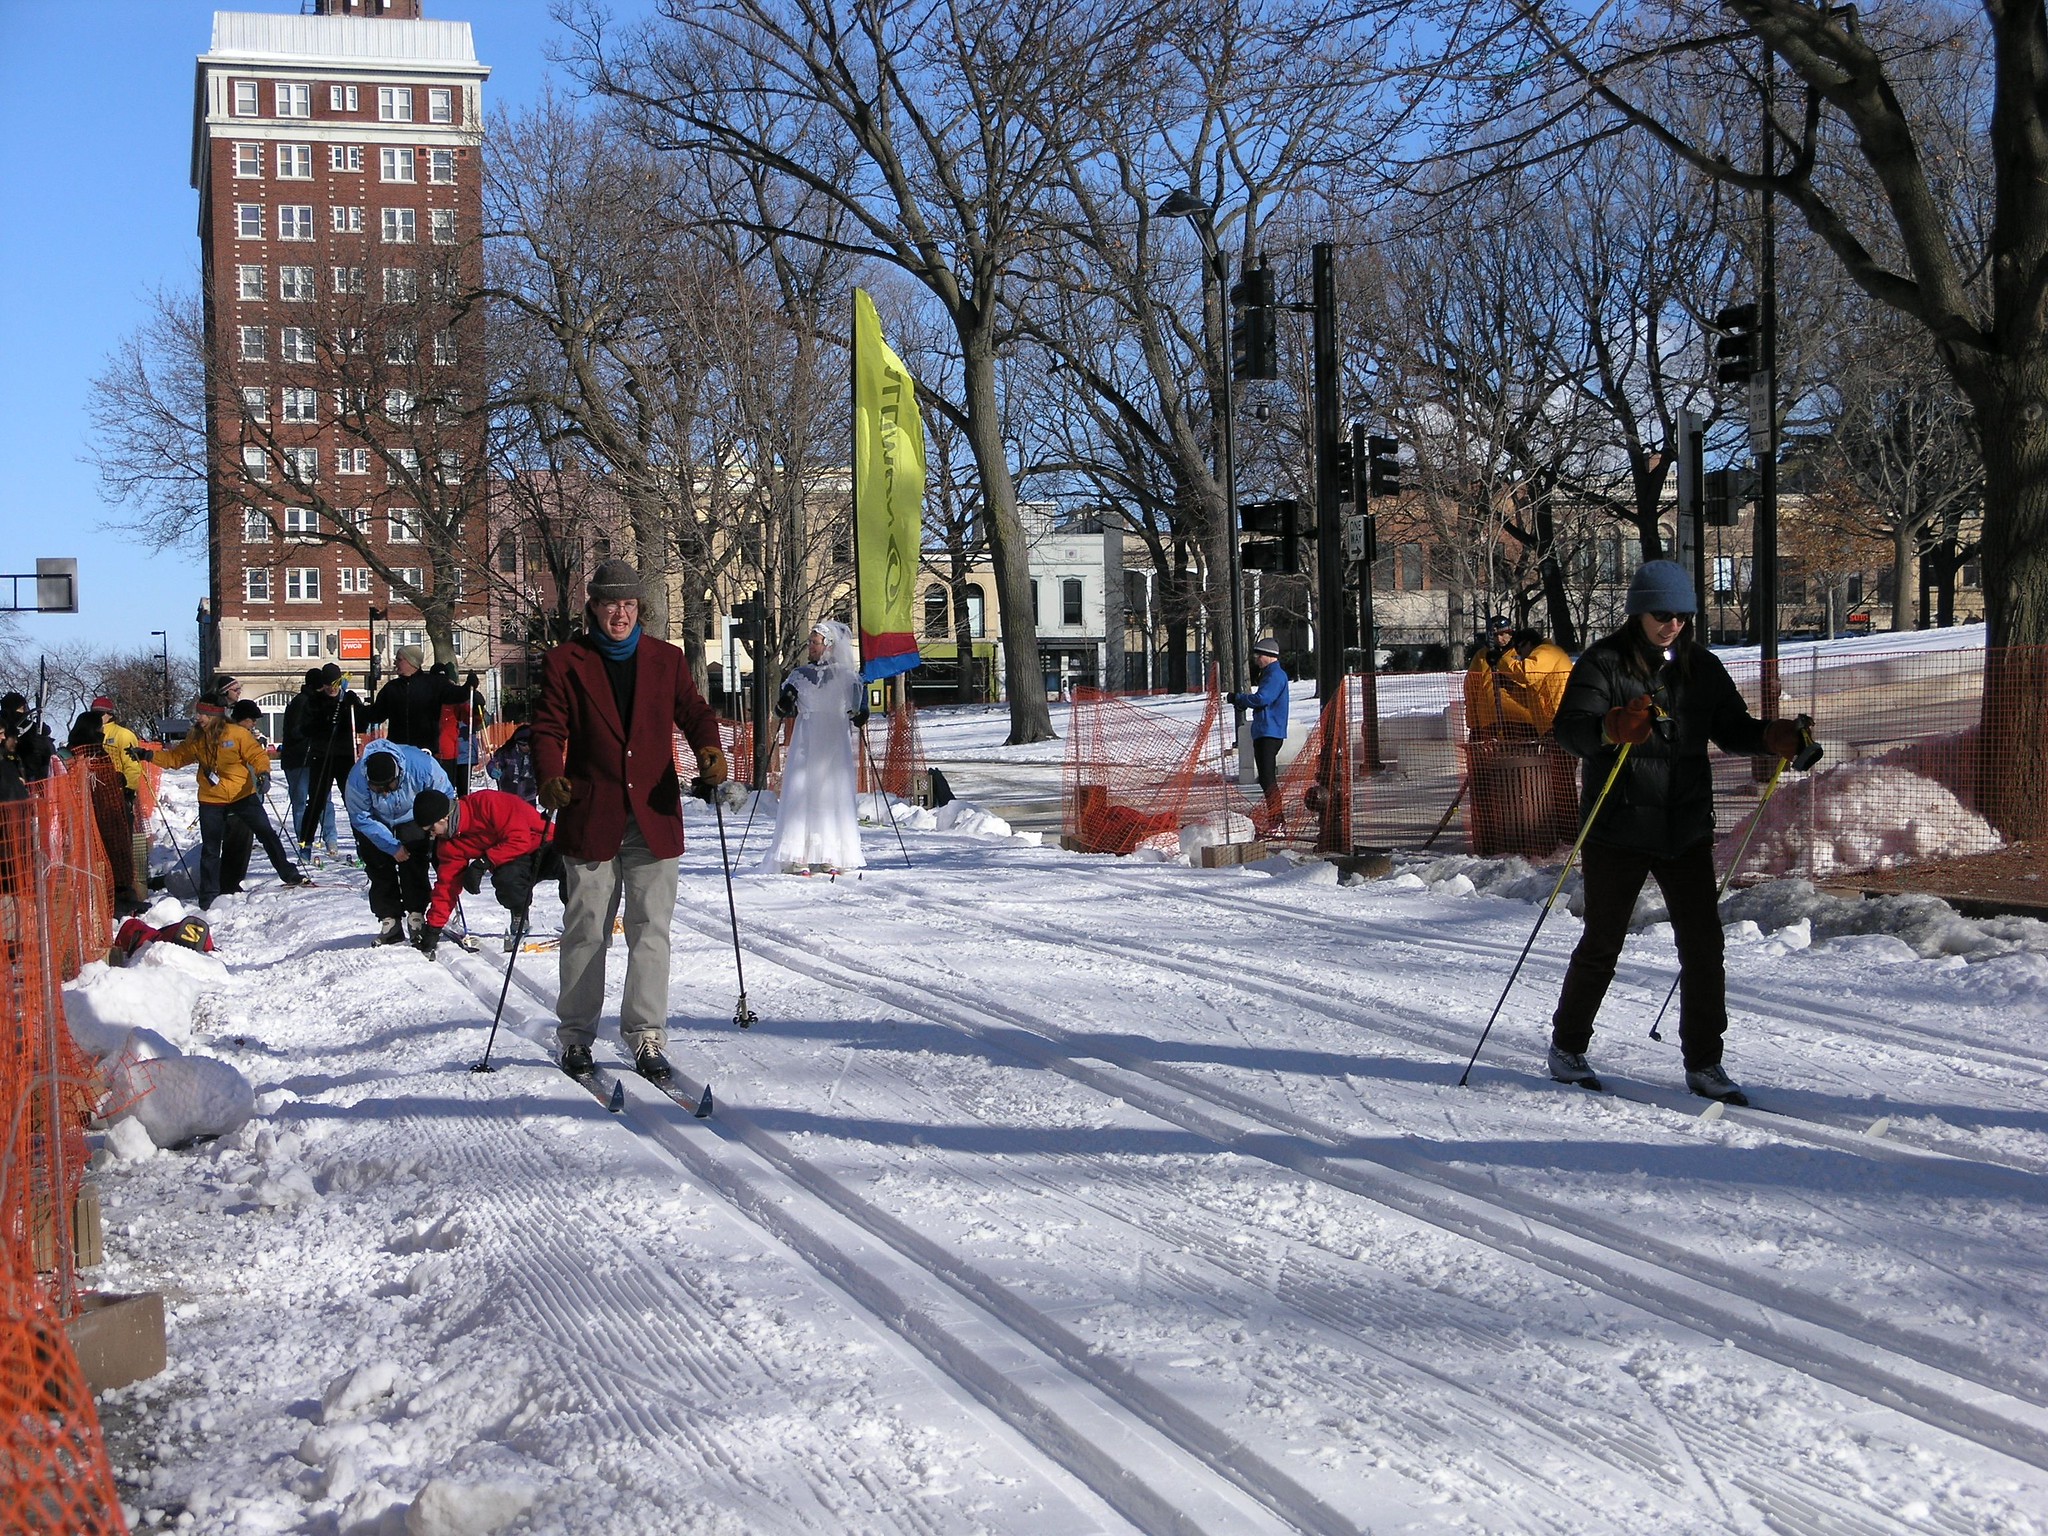 Winter Fest We are a community festival in Madison, Wisconsin